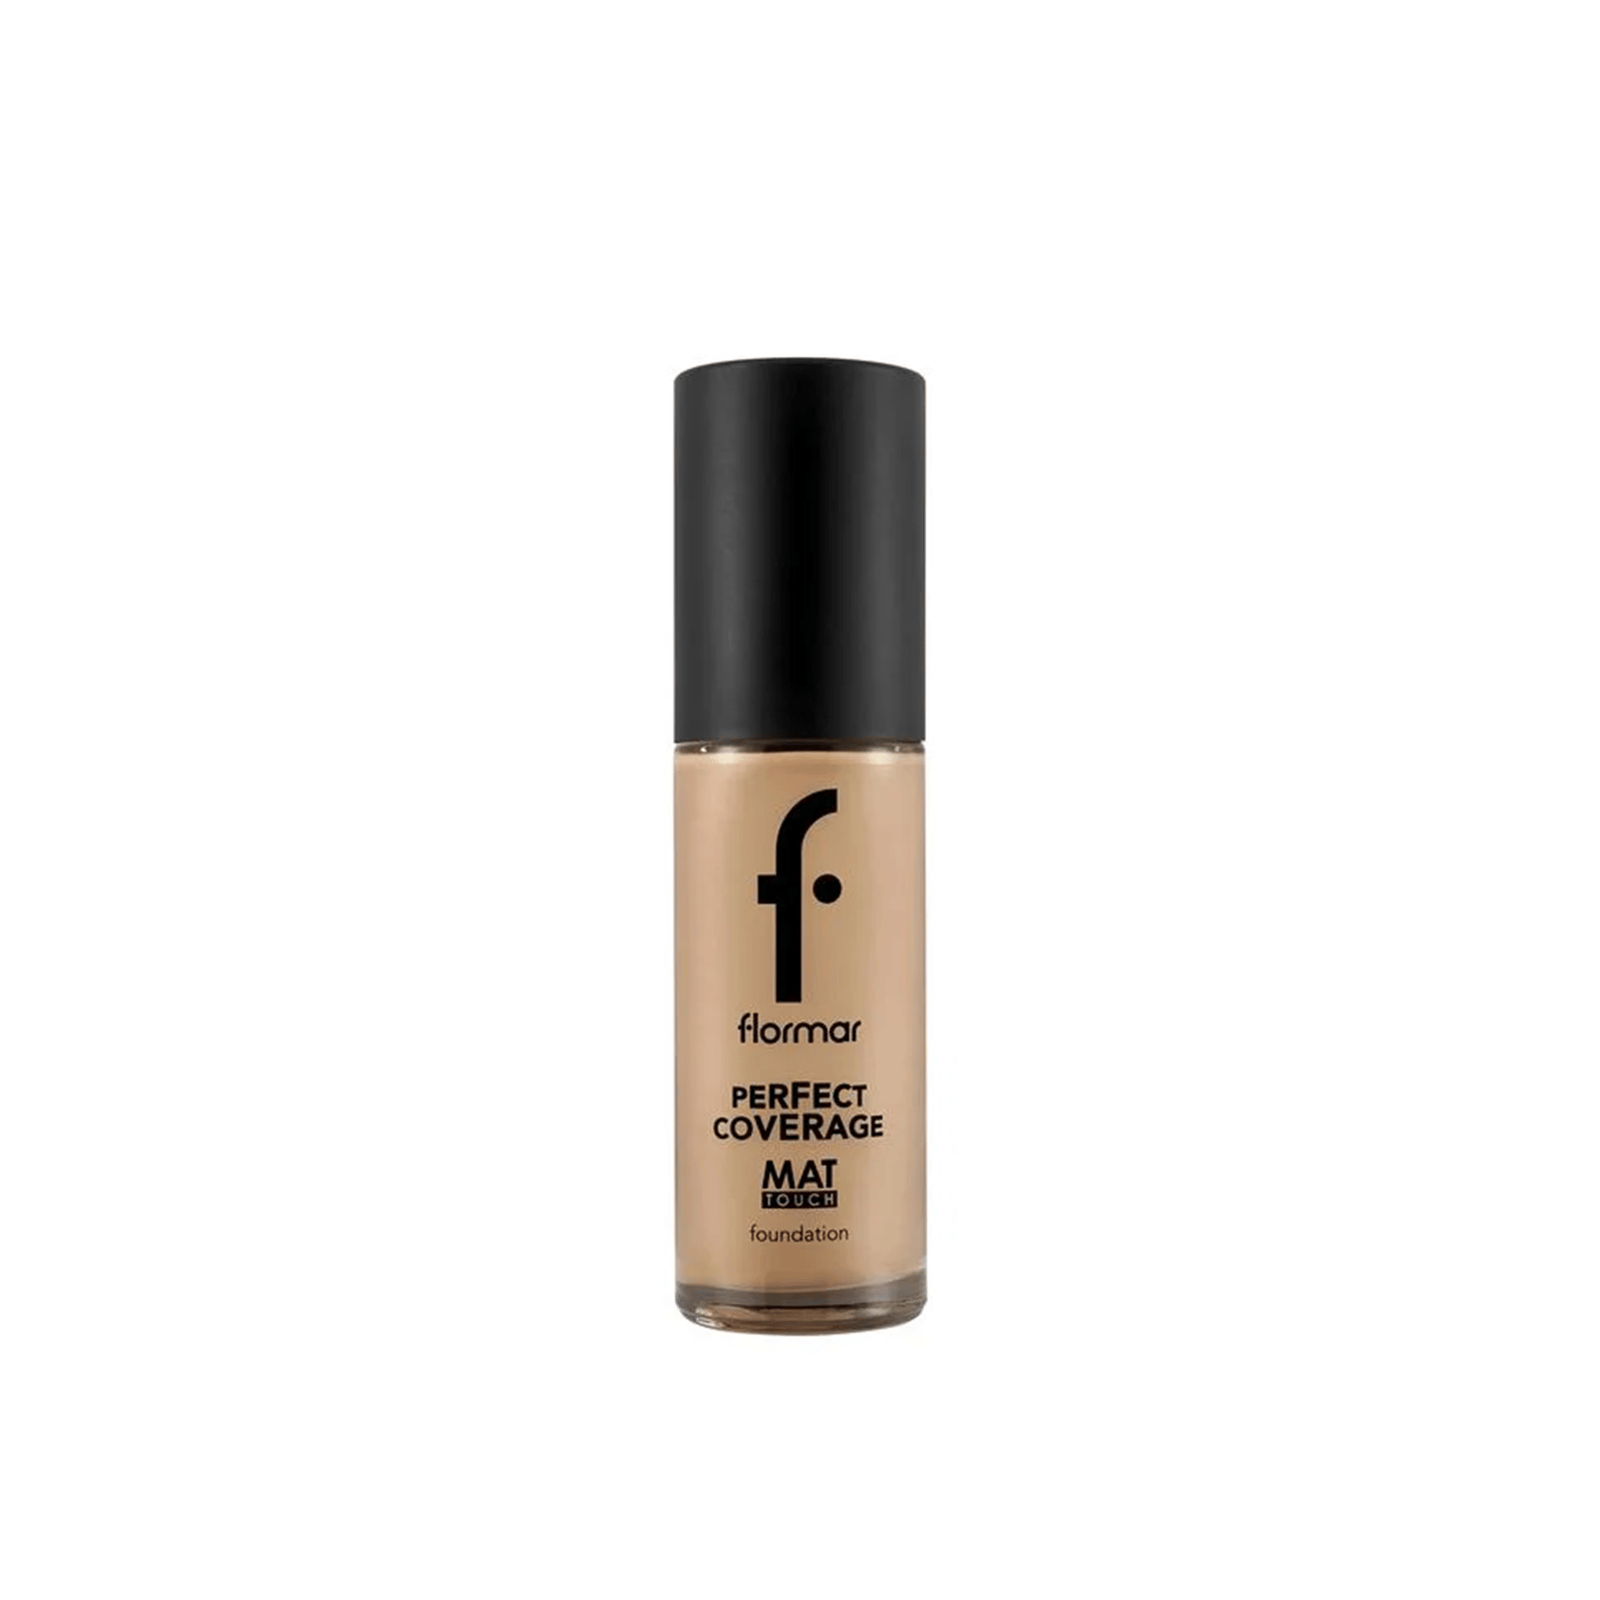 Perfect Coverage Foundation by Flormar Turkey's No.1 Cosmetic